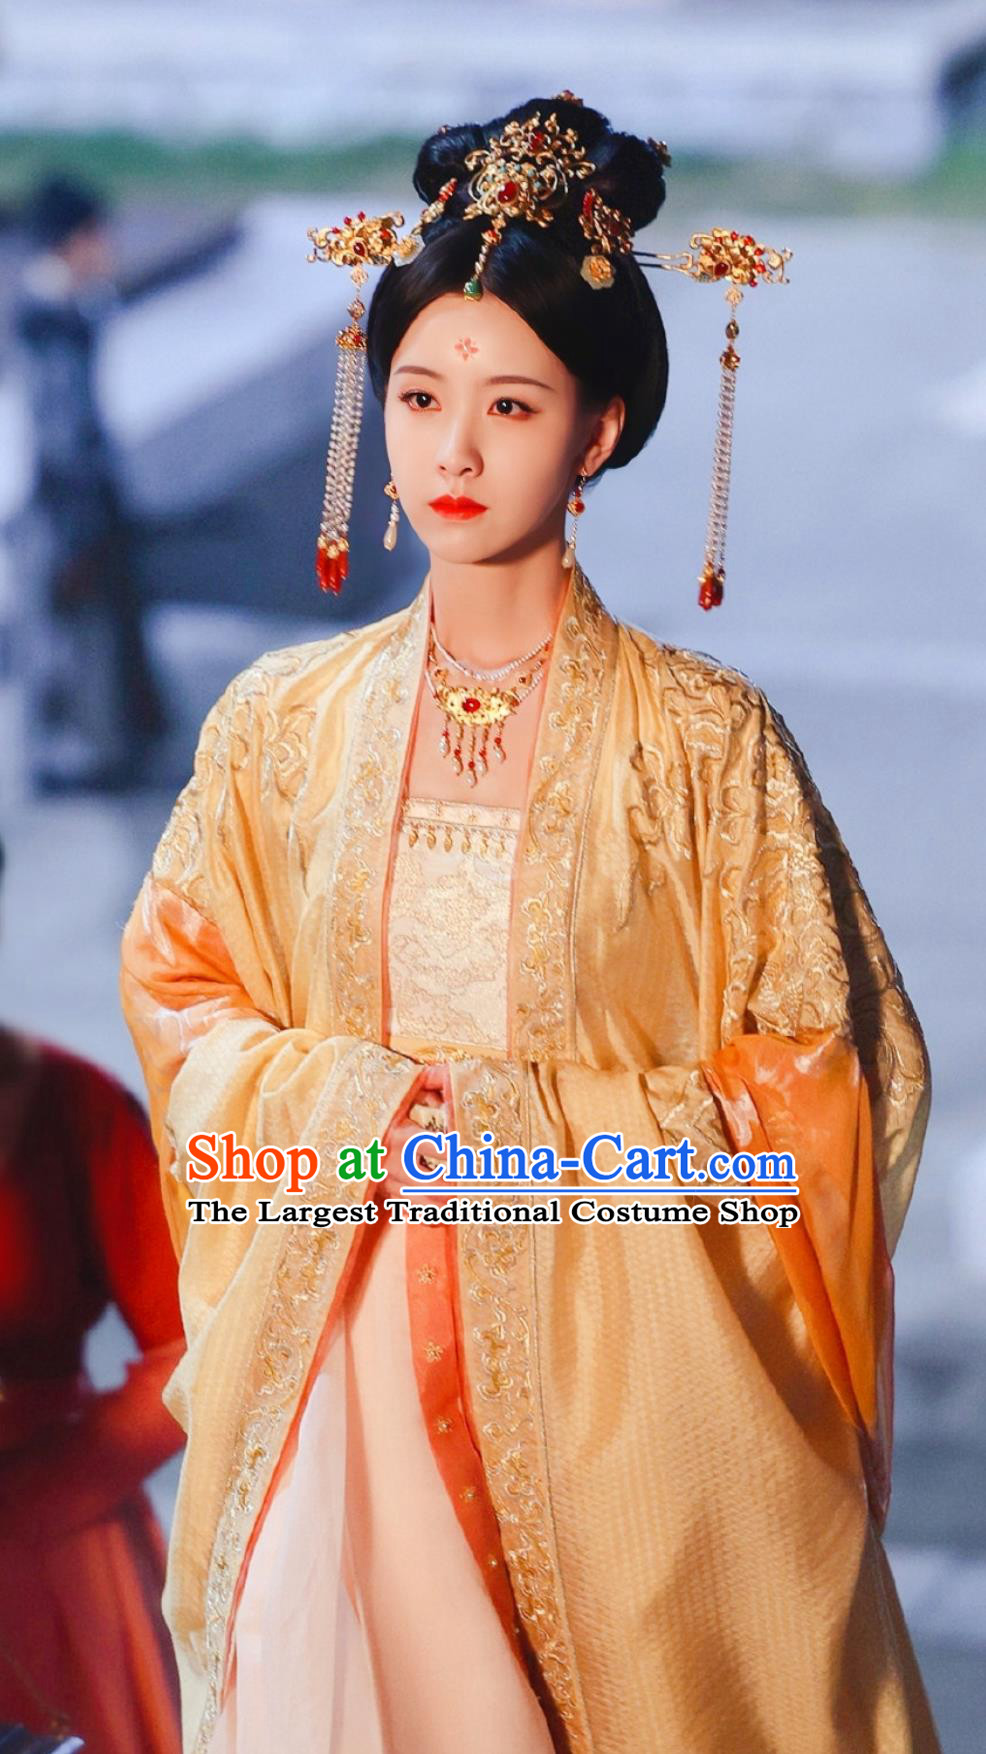 China Ancient Court Queen Clothing  TV Series A Journey To Love Empress Xiao Yan Dress